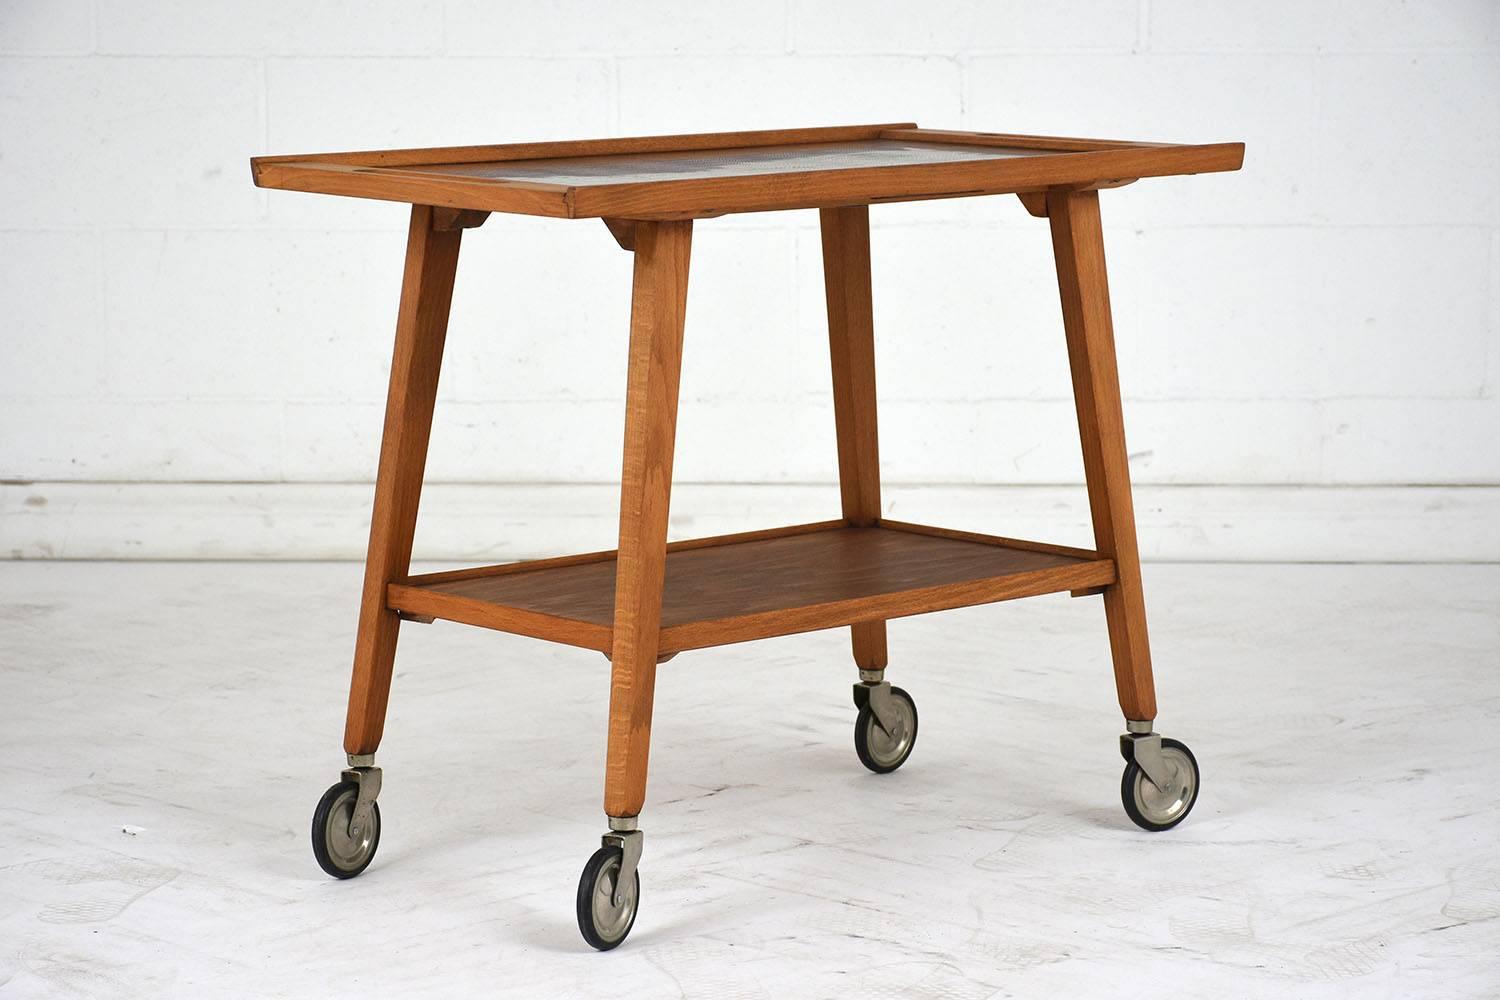 This 1970's Mid-Century Modern-style bar cart features a wood frame stained in a light walnut color. The top of the cart has an inlaid detail of feathers and handles on the side. Below is an open shelf. The bar cart is finished with tapered legs and